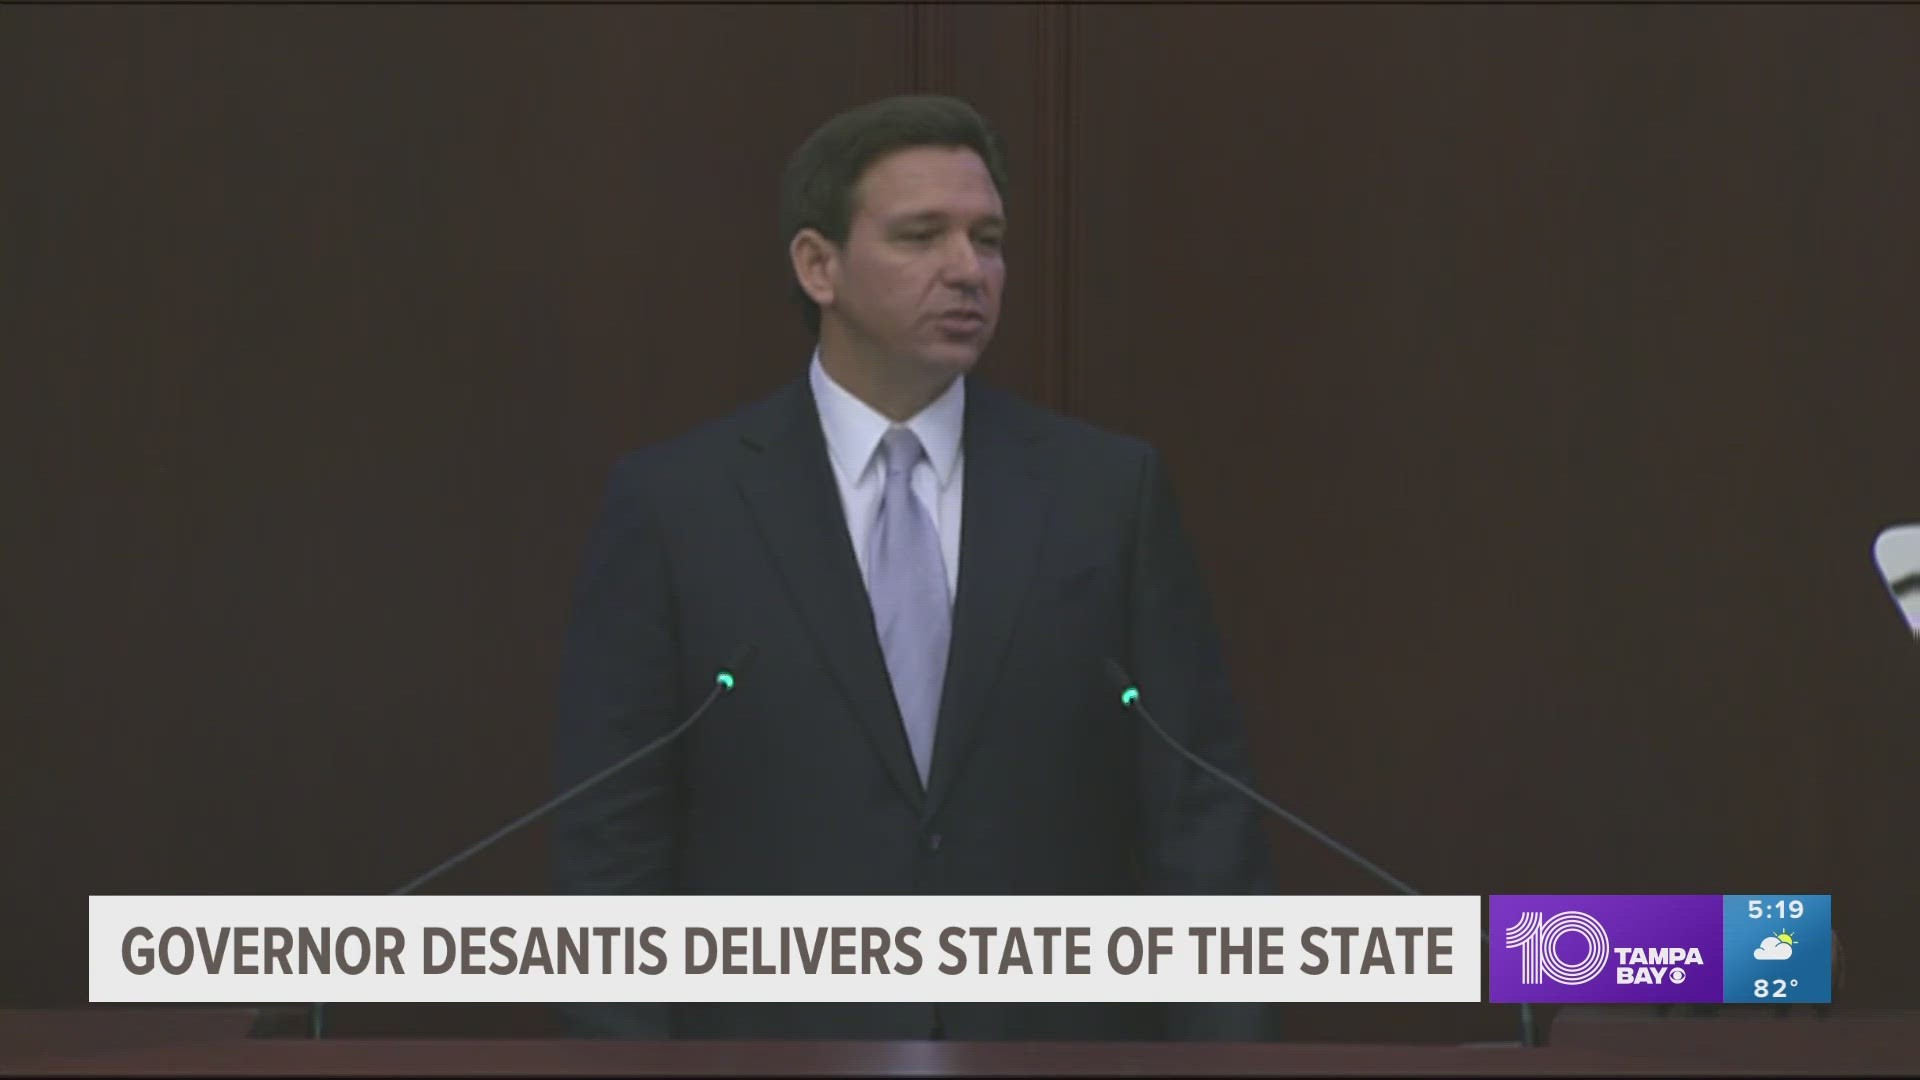 A 60-day legislative session that will likely be used to launch DeSantis into a potential presidential bid is now underway.